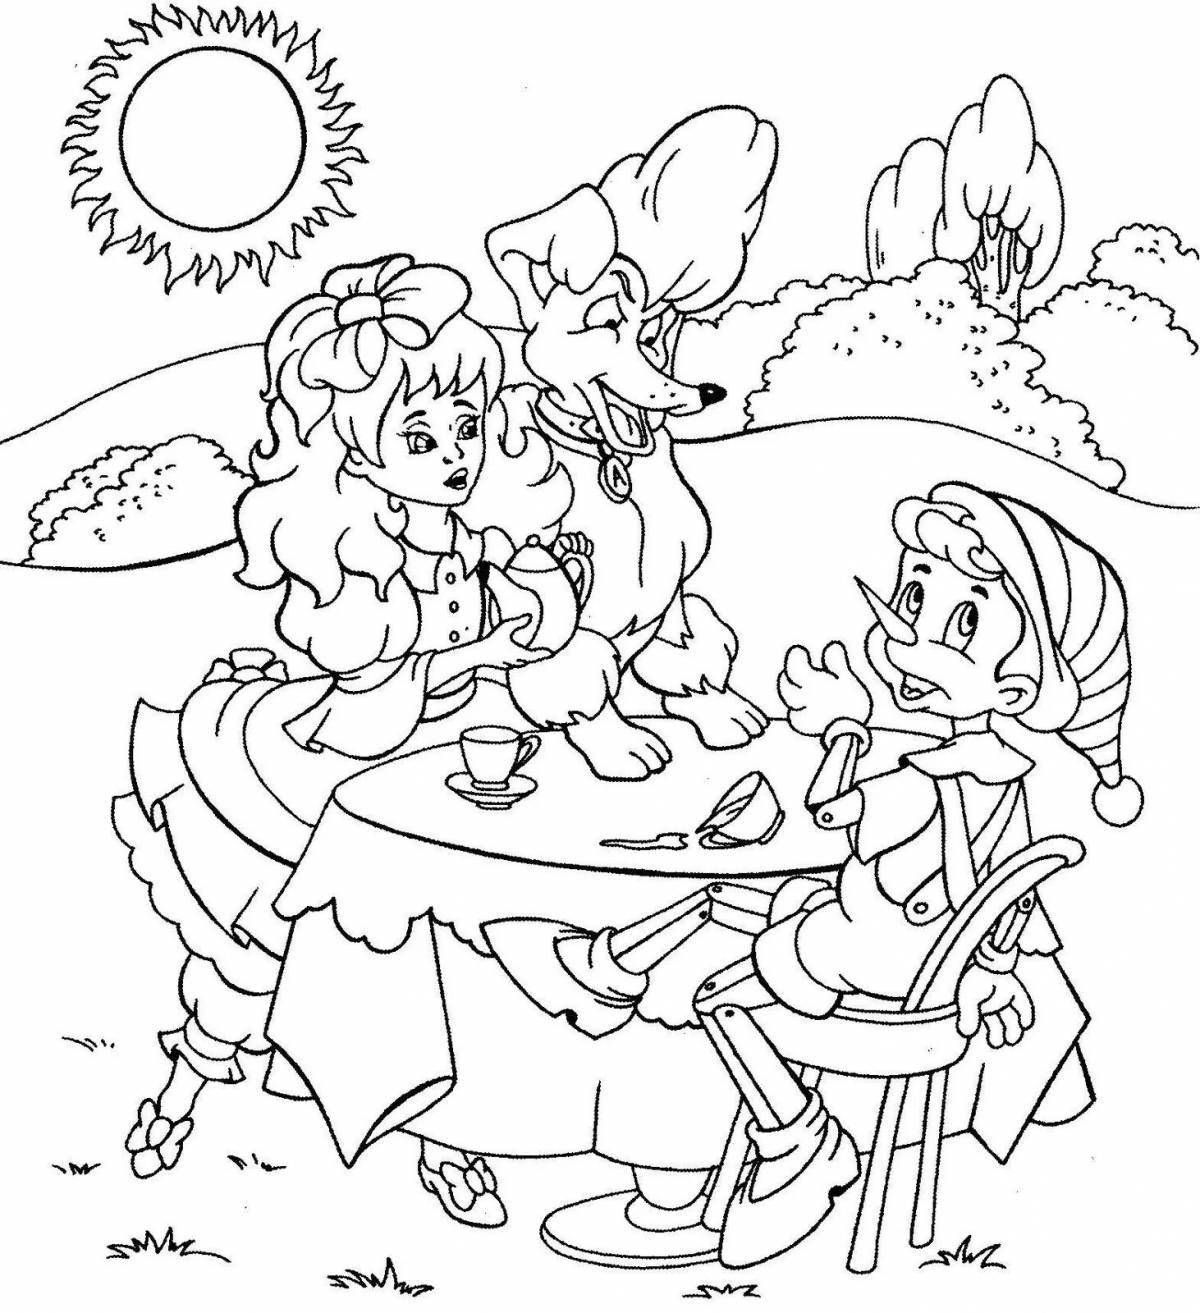 Charming pinocchio coloring book